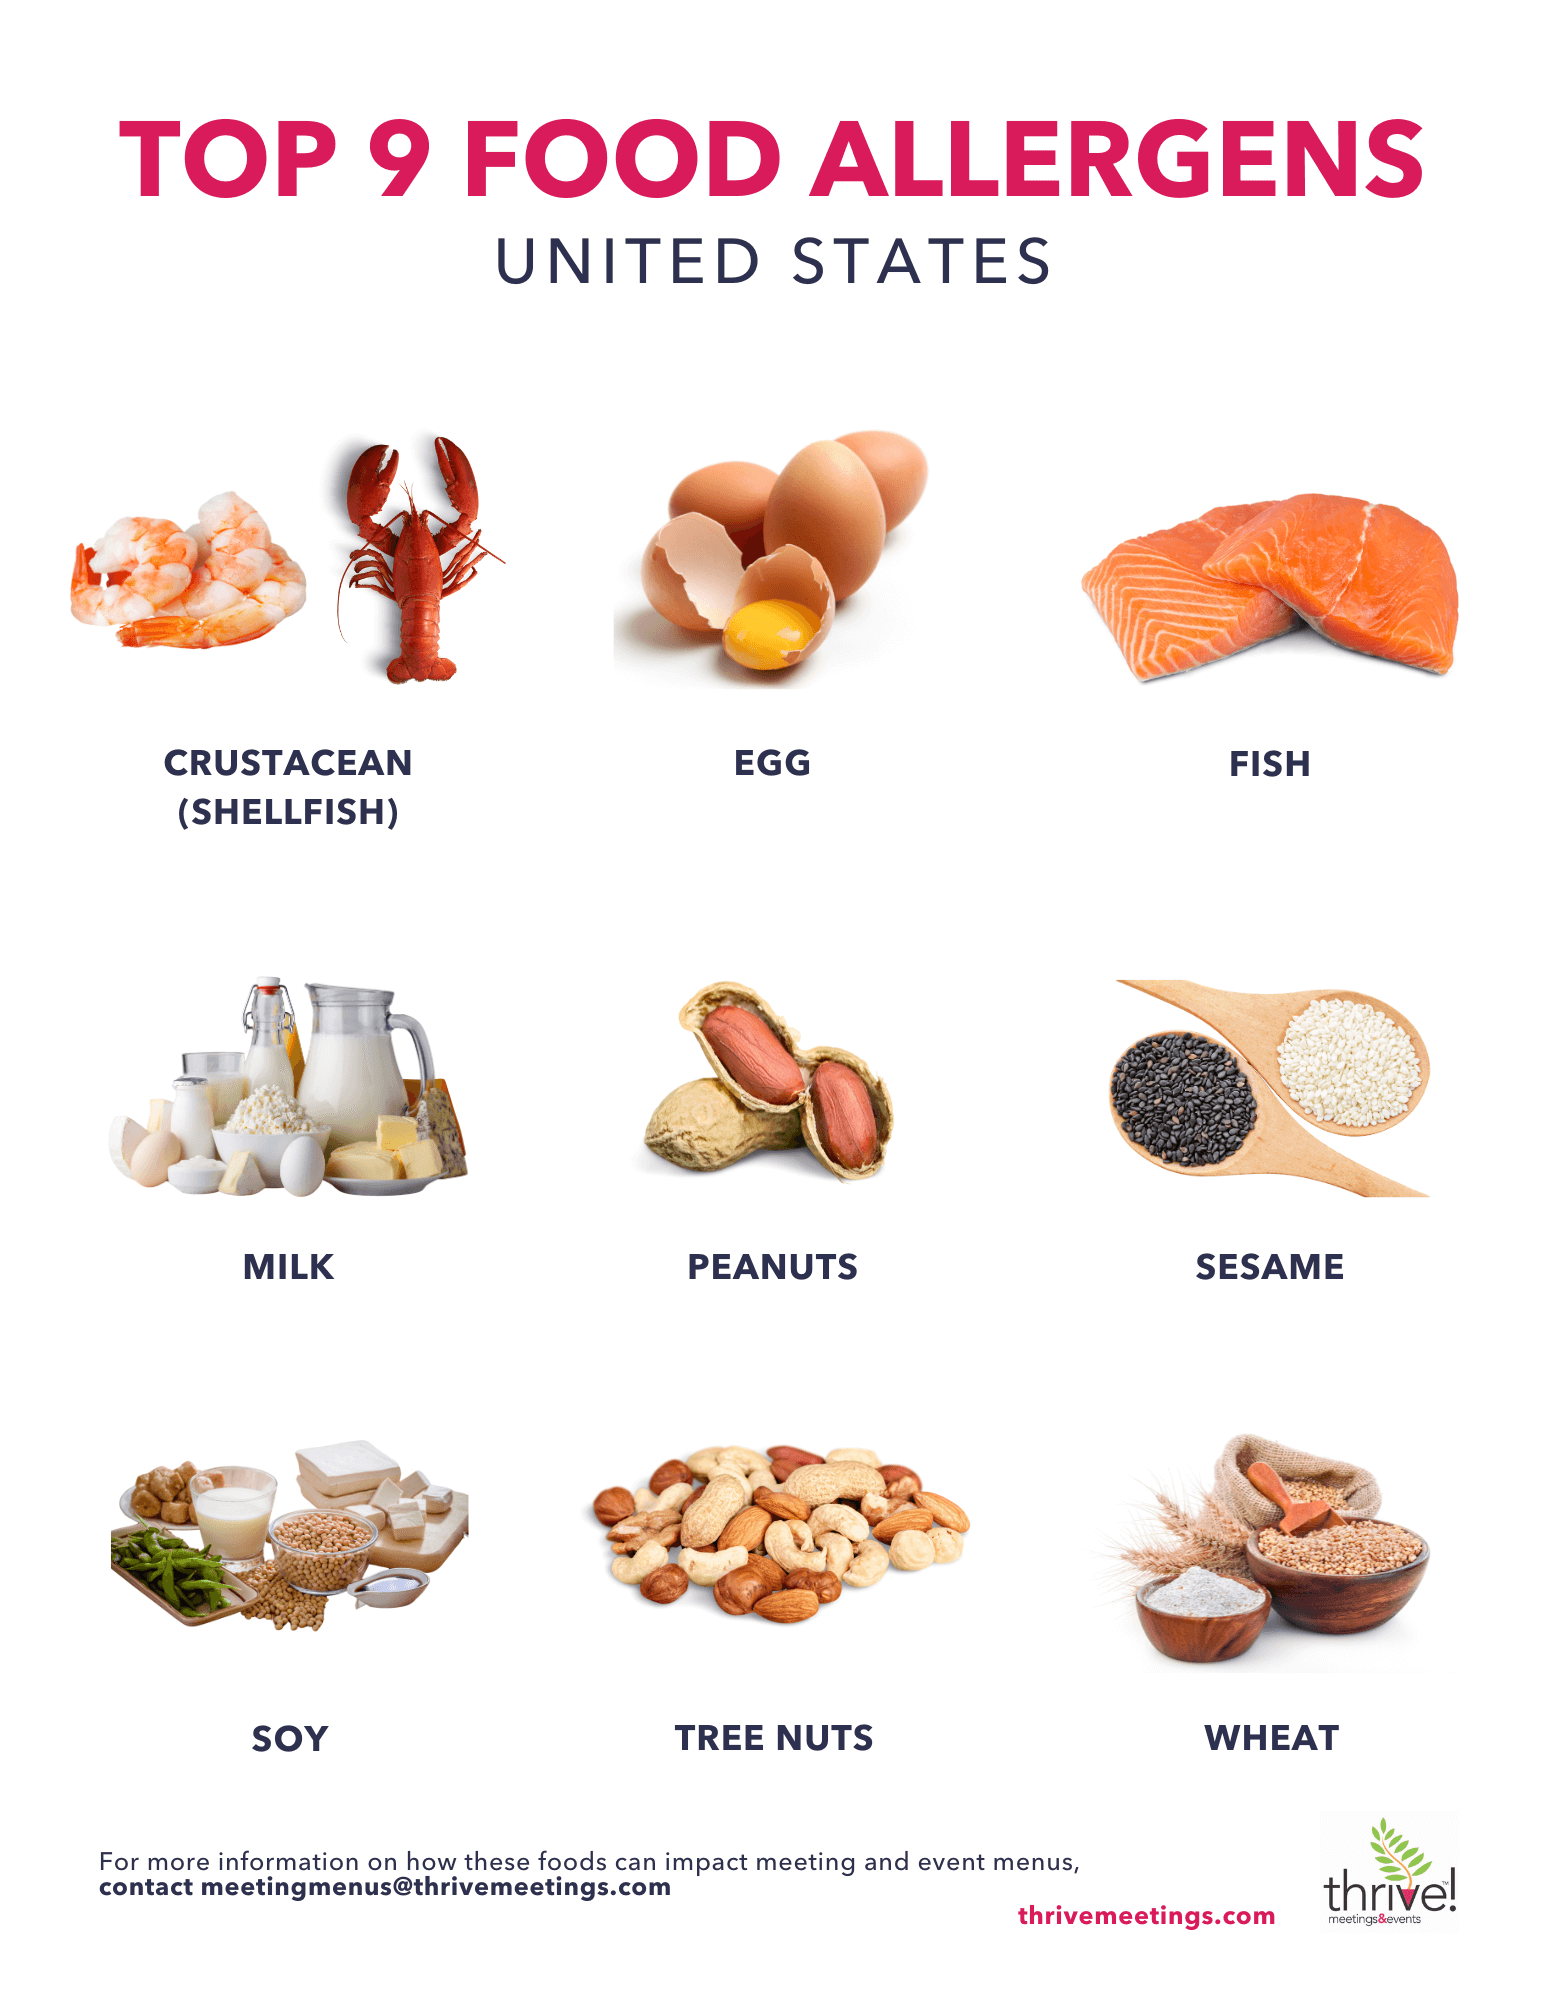 Top 9 Food Allergens United States. Pictures with words beneath them of crustaceans (shellfish), Egg, Fish, Milk, Peanuts, Sesame, Soy, Tree Nuts, and wheat